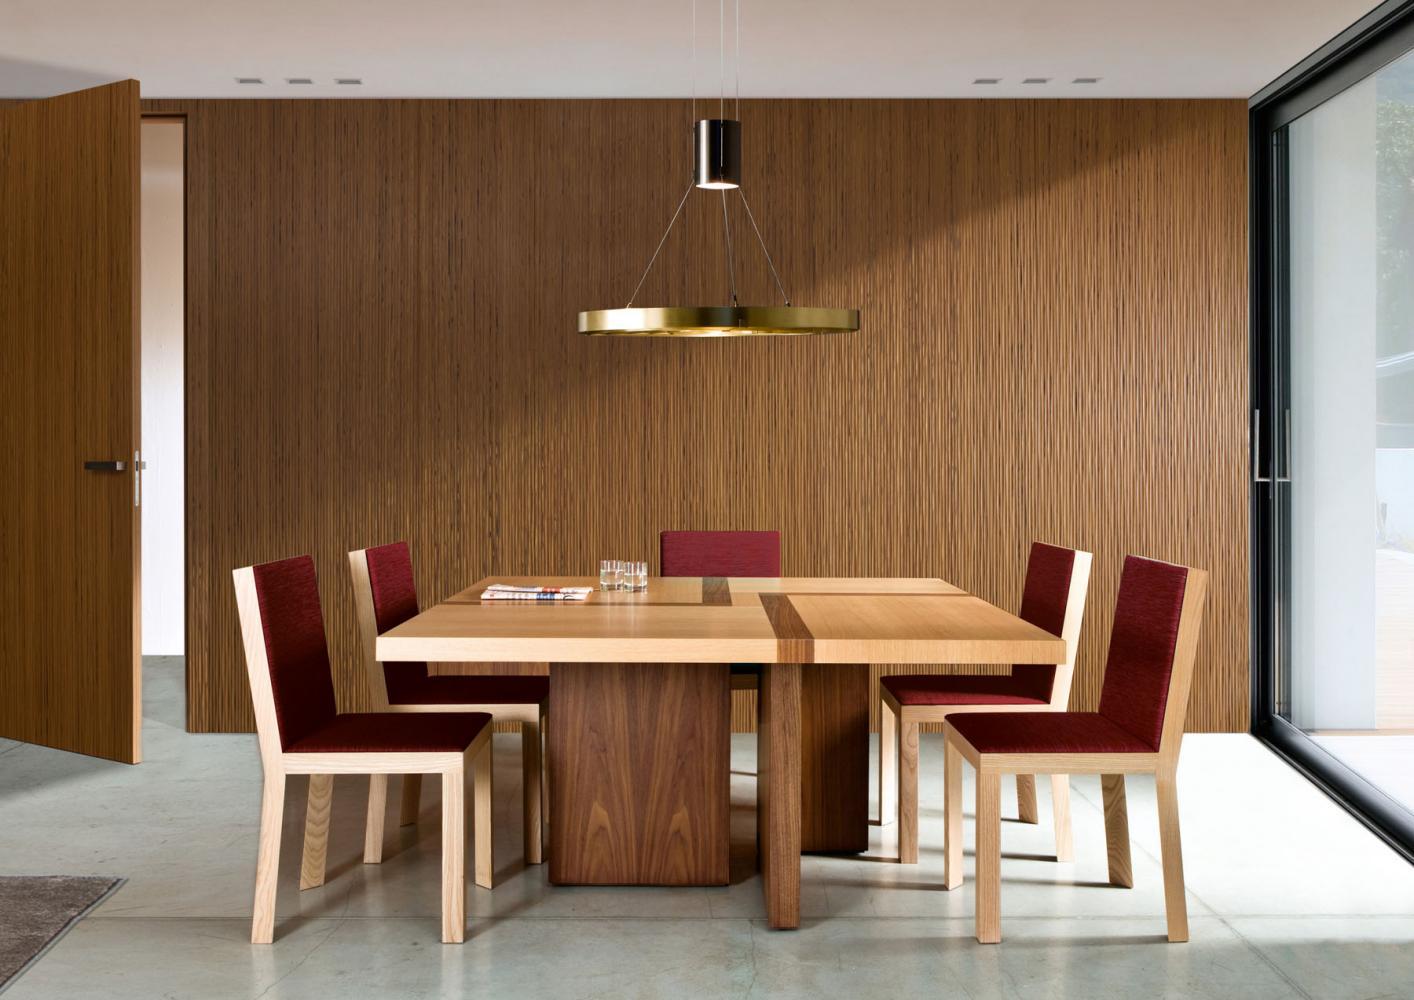 Laurameroni luxury modern made to measure wooden tables for contemporary interior decor and design